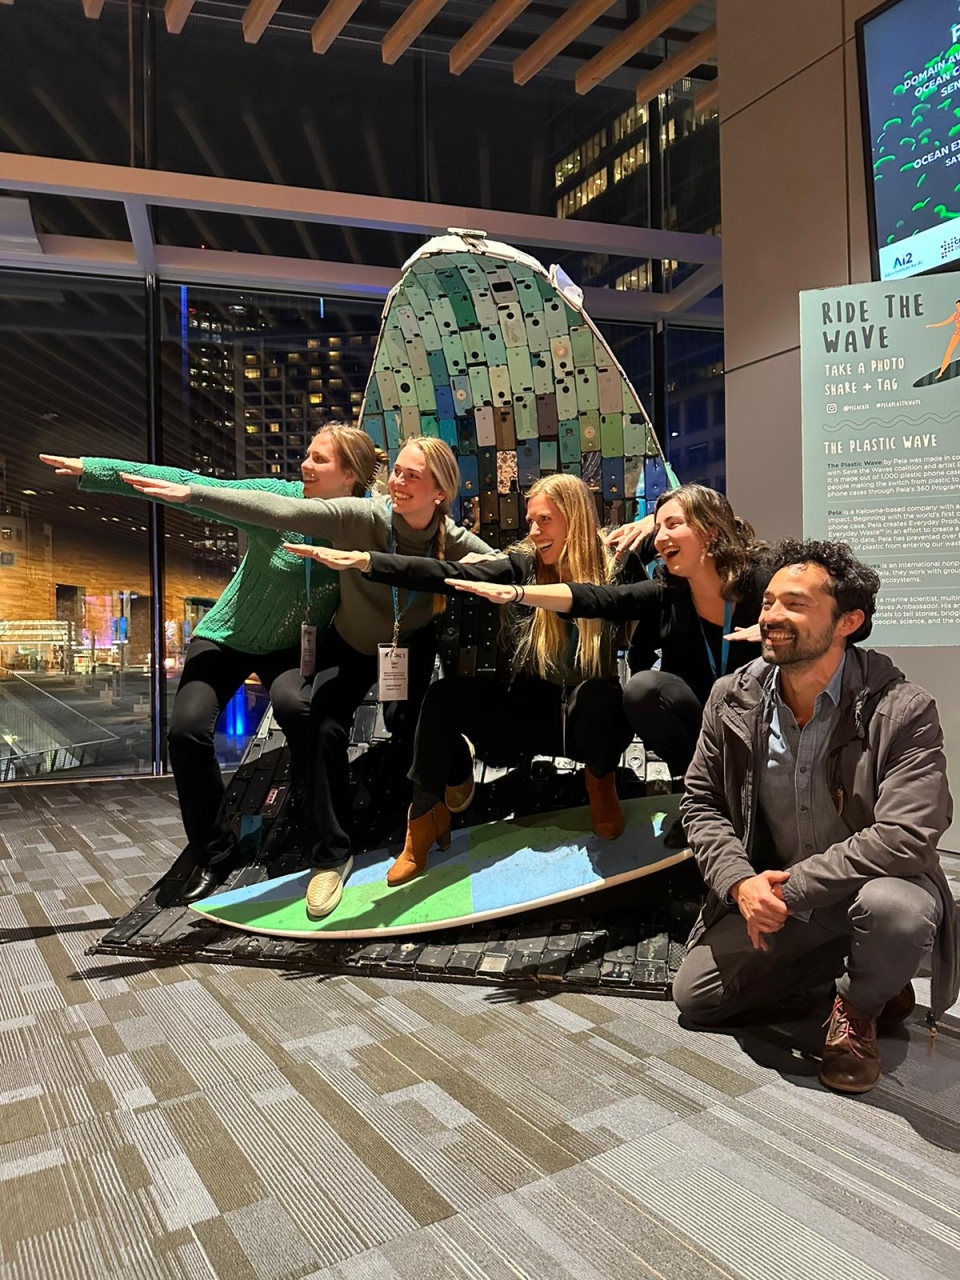 Environmental Policy students Hannah Ditty, Libby Mohn, Liz Hoffius, Molly Ryan, and Diego Tabilo at the IMPAC5 conference in Vancouver, Canada posing as if surfing